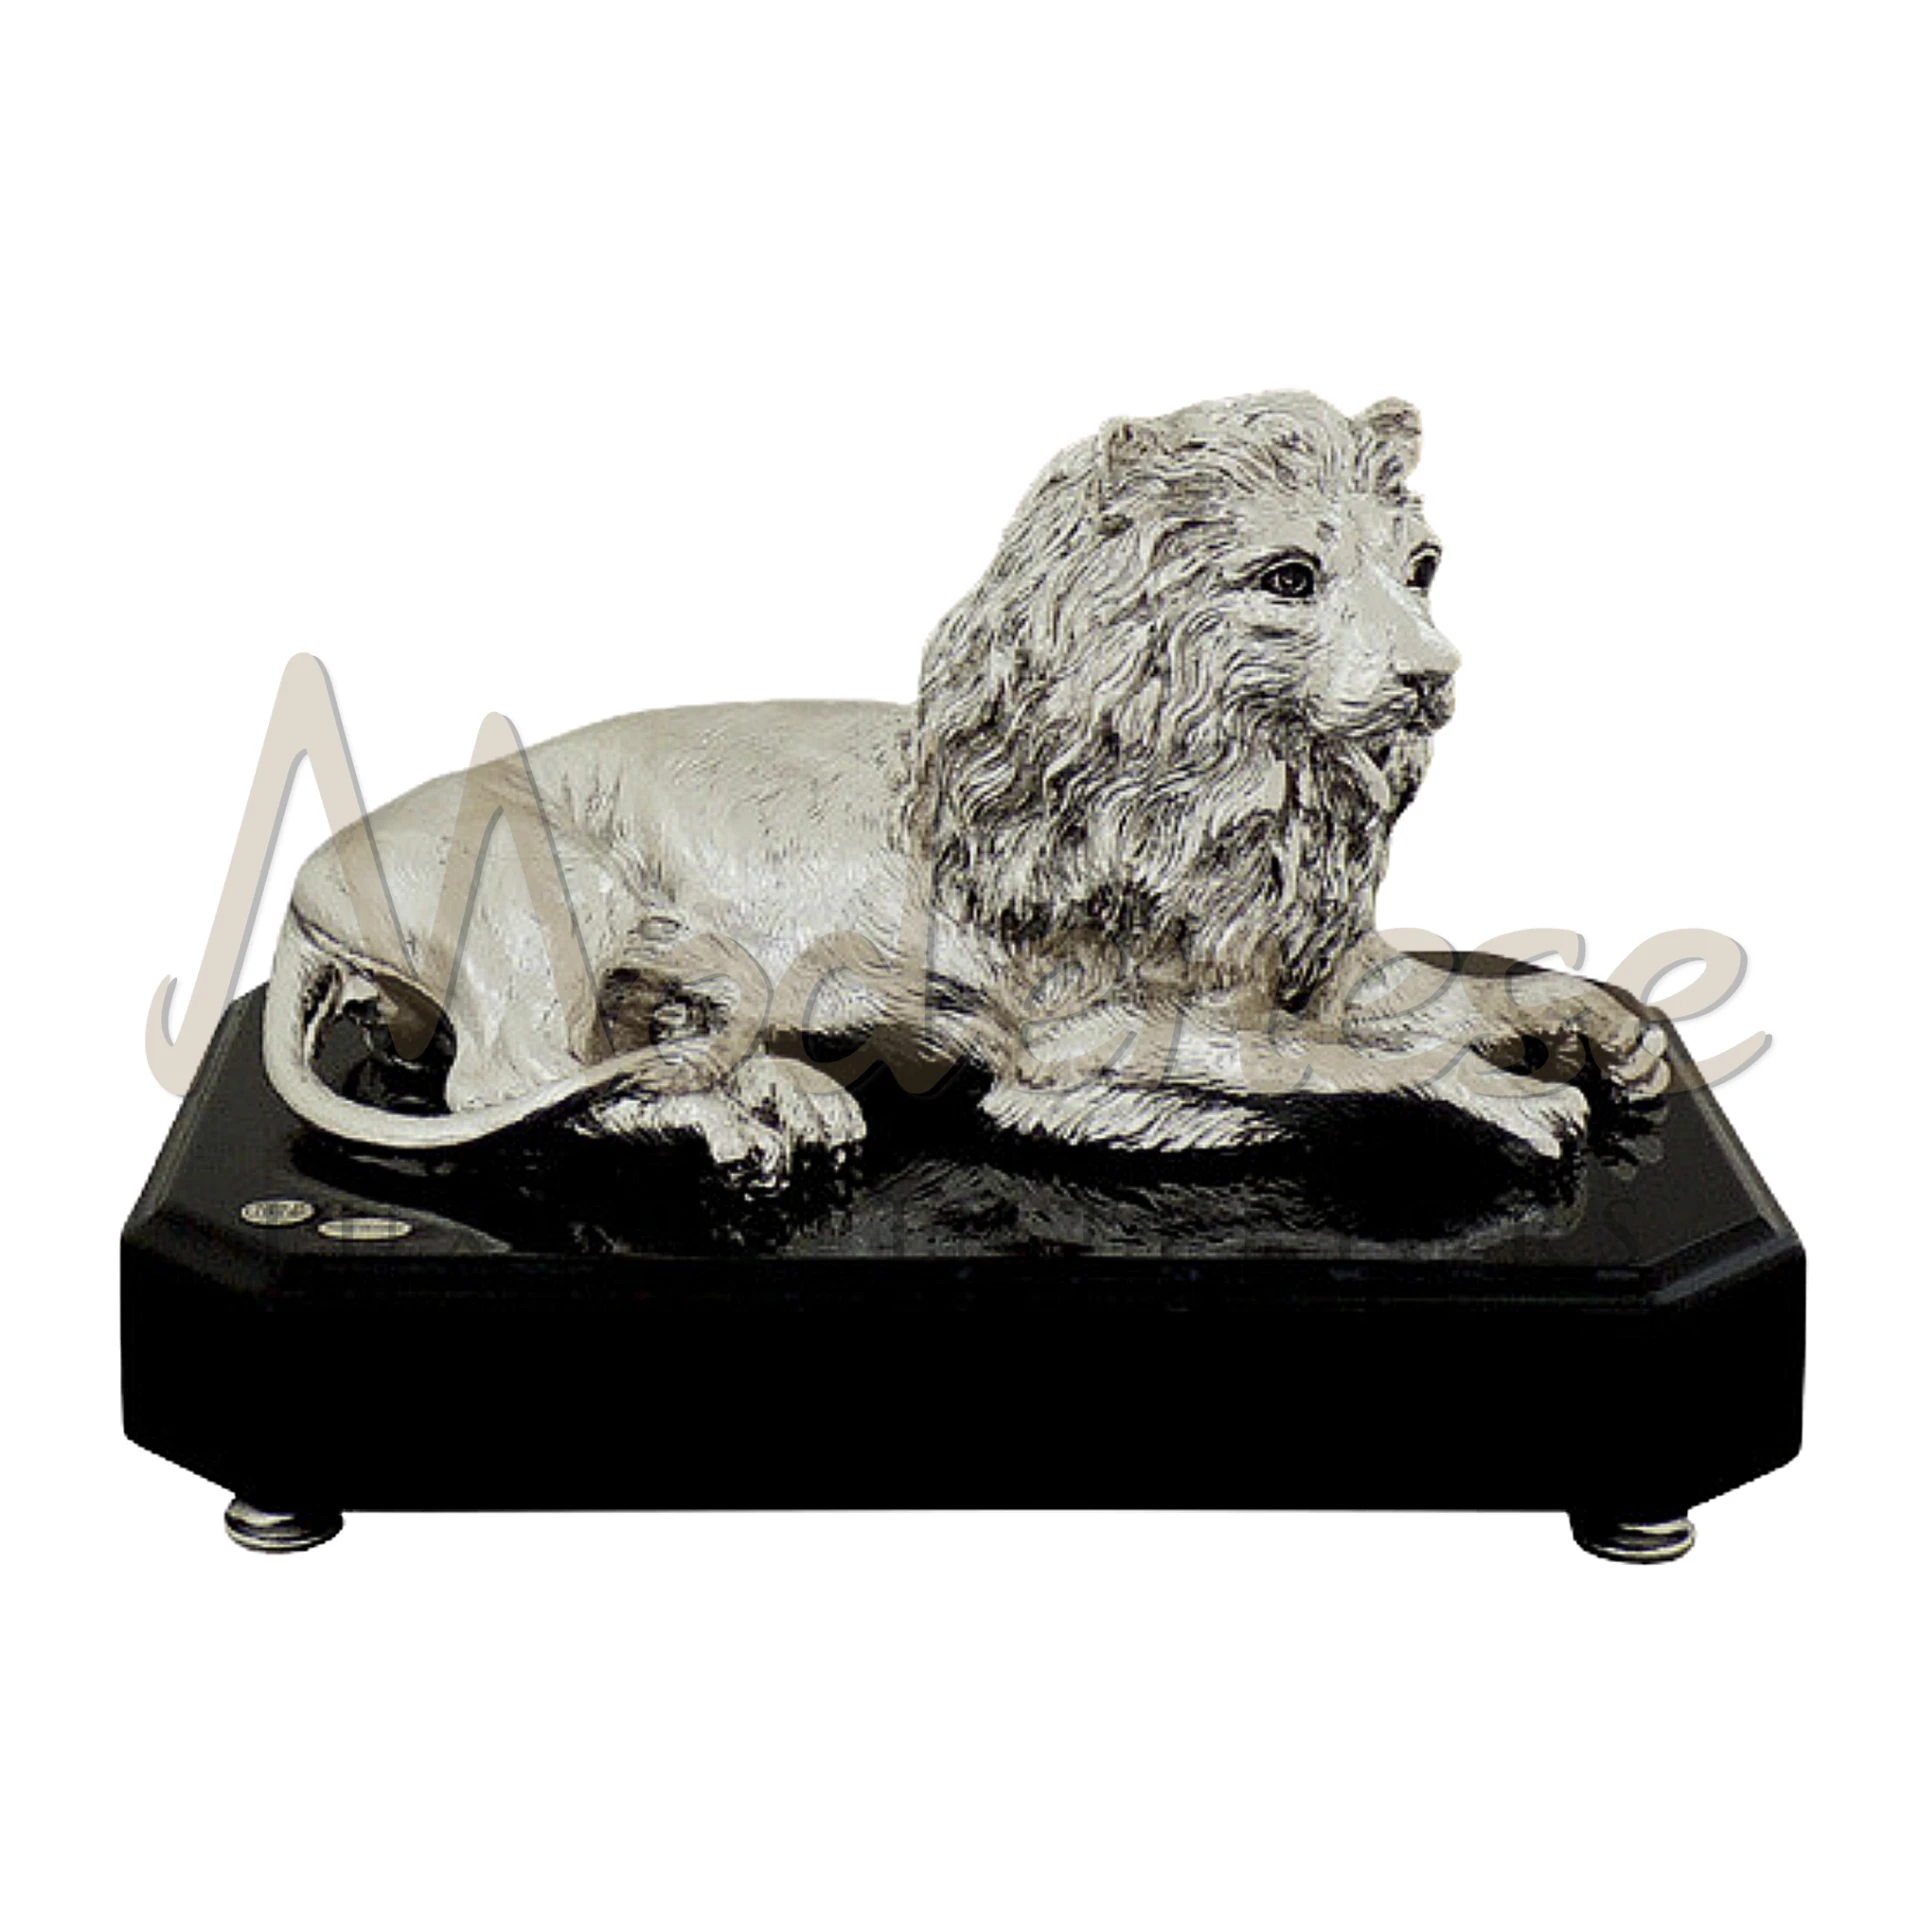 Exquisite Silver Lion statue, symbolizing strength and majesty, ideal for luxury interior decor and design enthusiasts.